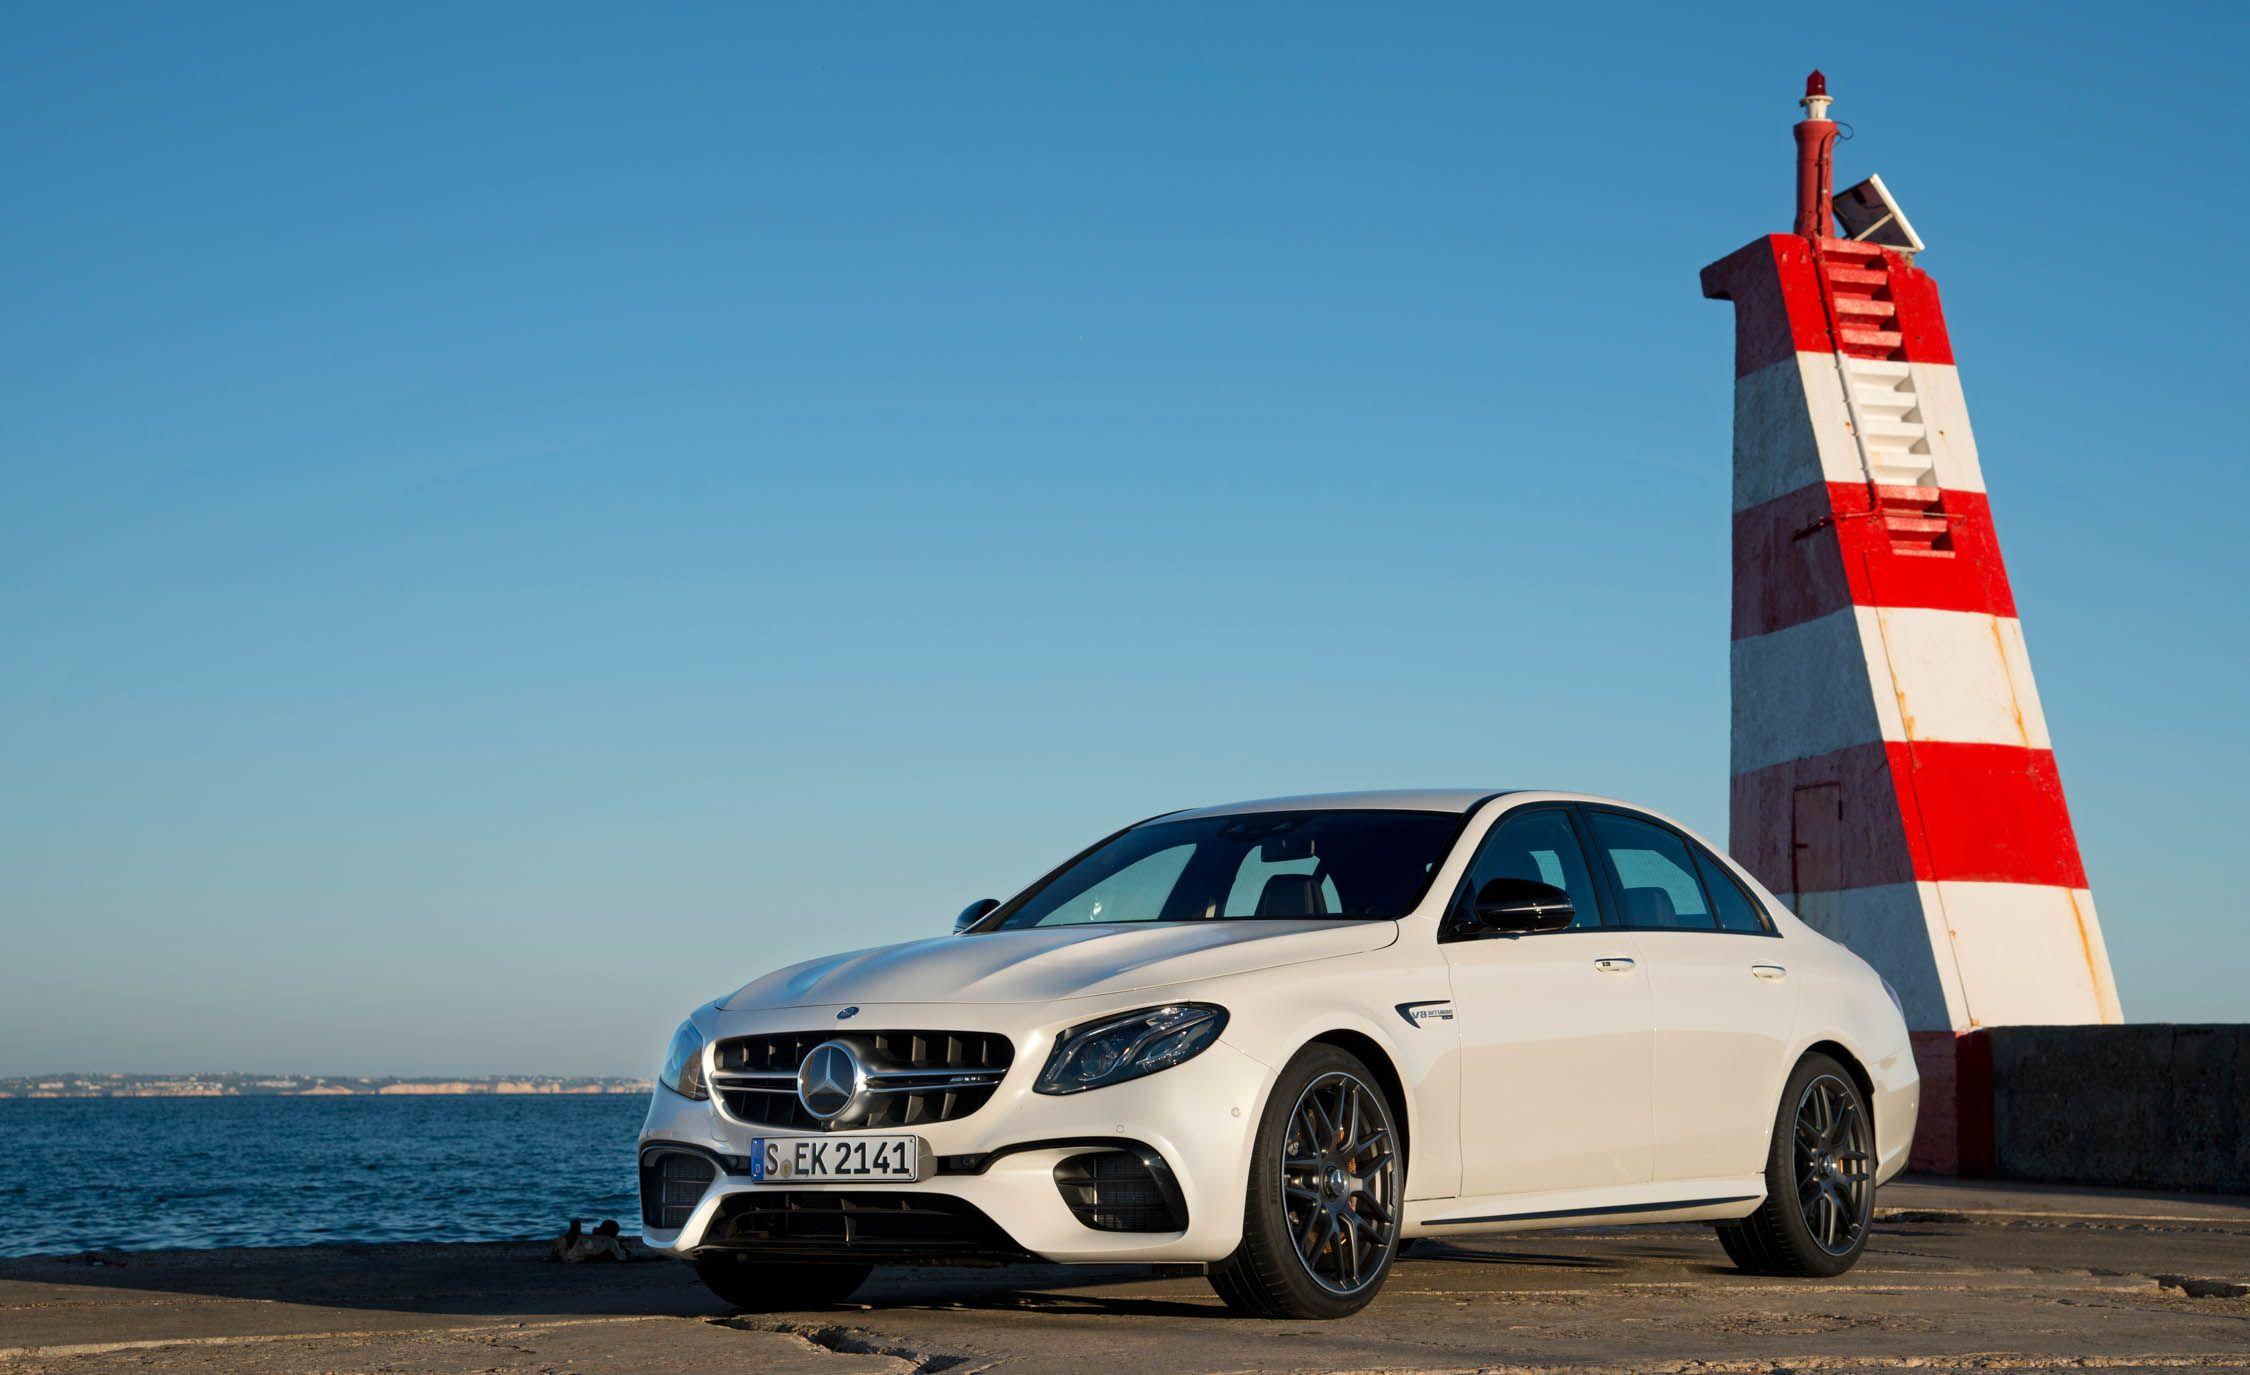 Mercedes AMG E63 Wallpaper HD Gallery (Photo 41 of 41)